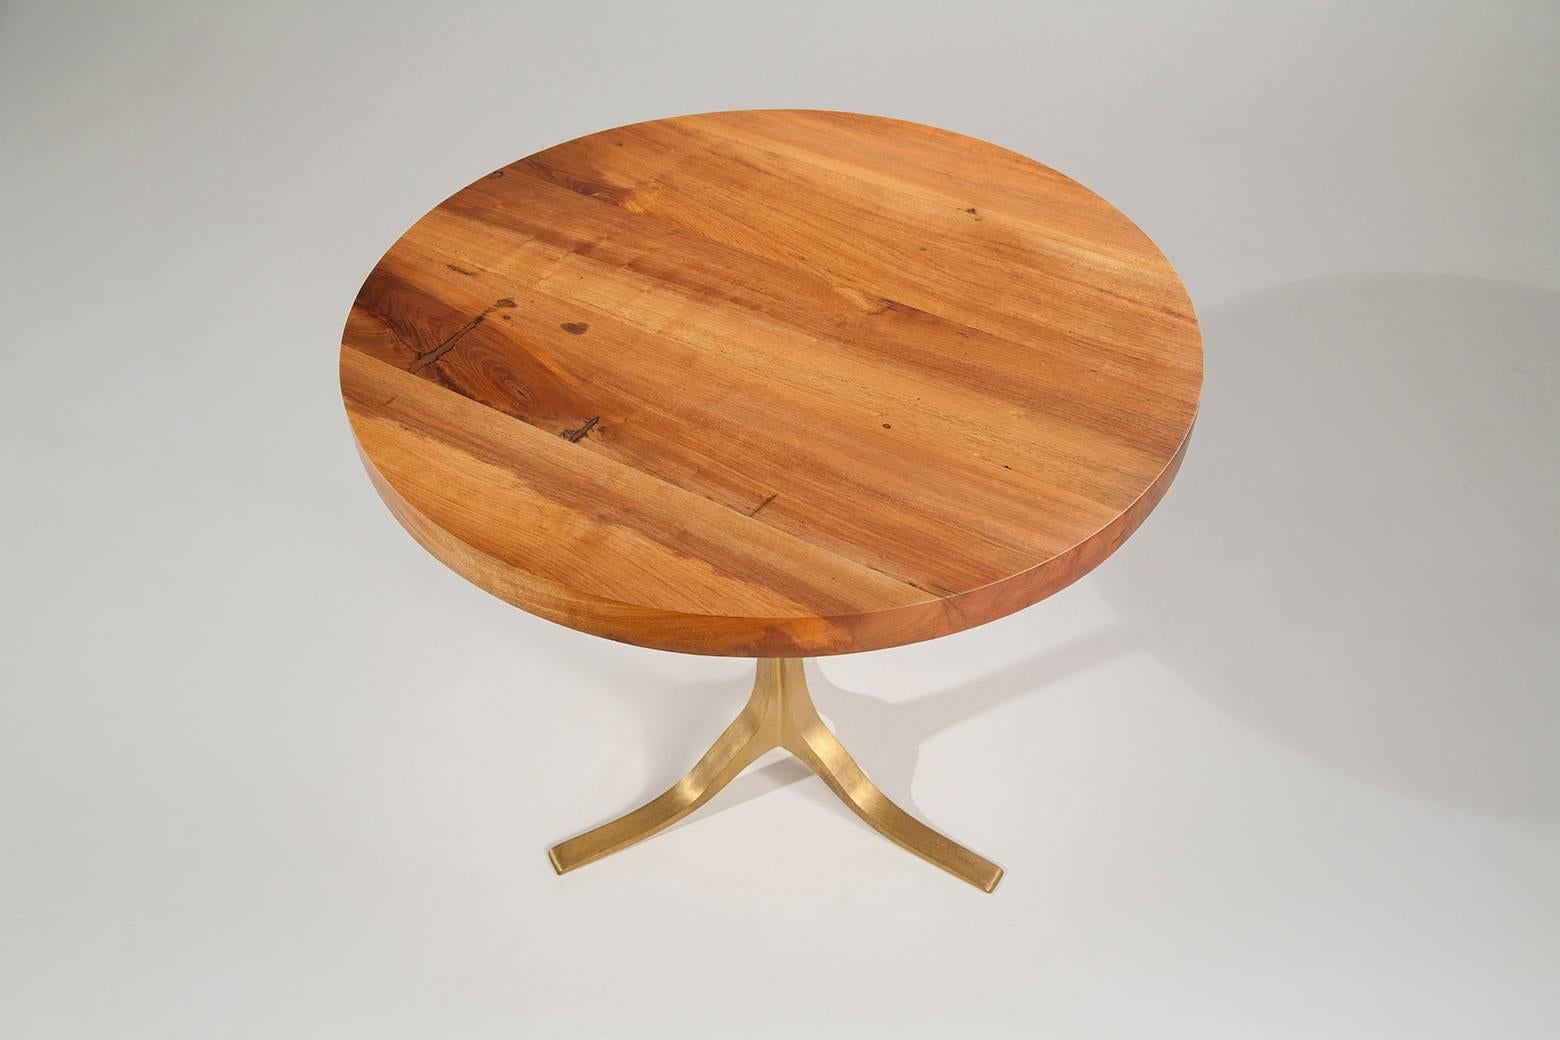 Model: FTOP_PT11_BS1
Top: Reclaimed Hardwood
Top Finish: Natural oiled
Base: PT11 base, sand cast brass
Base Finish: Golden sand
Dimensions: diameter 85 x 76 cm
(w x d x h) diameter 33.46 x 29.9 inch

AVAILABLE NOW in our gallery!

We created this